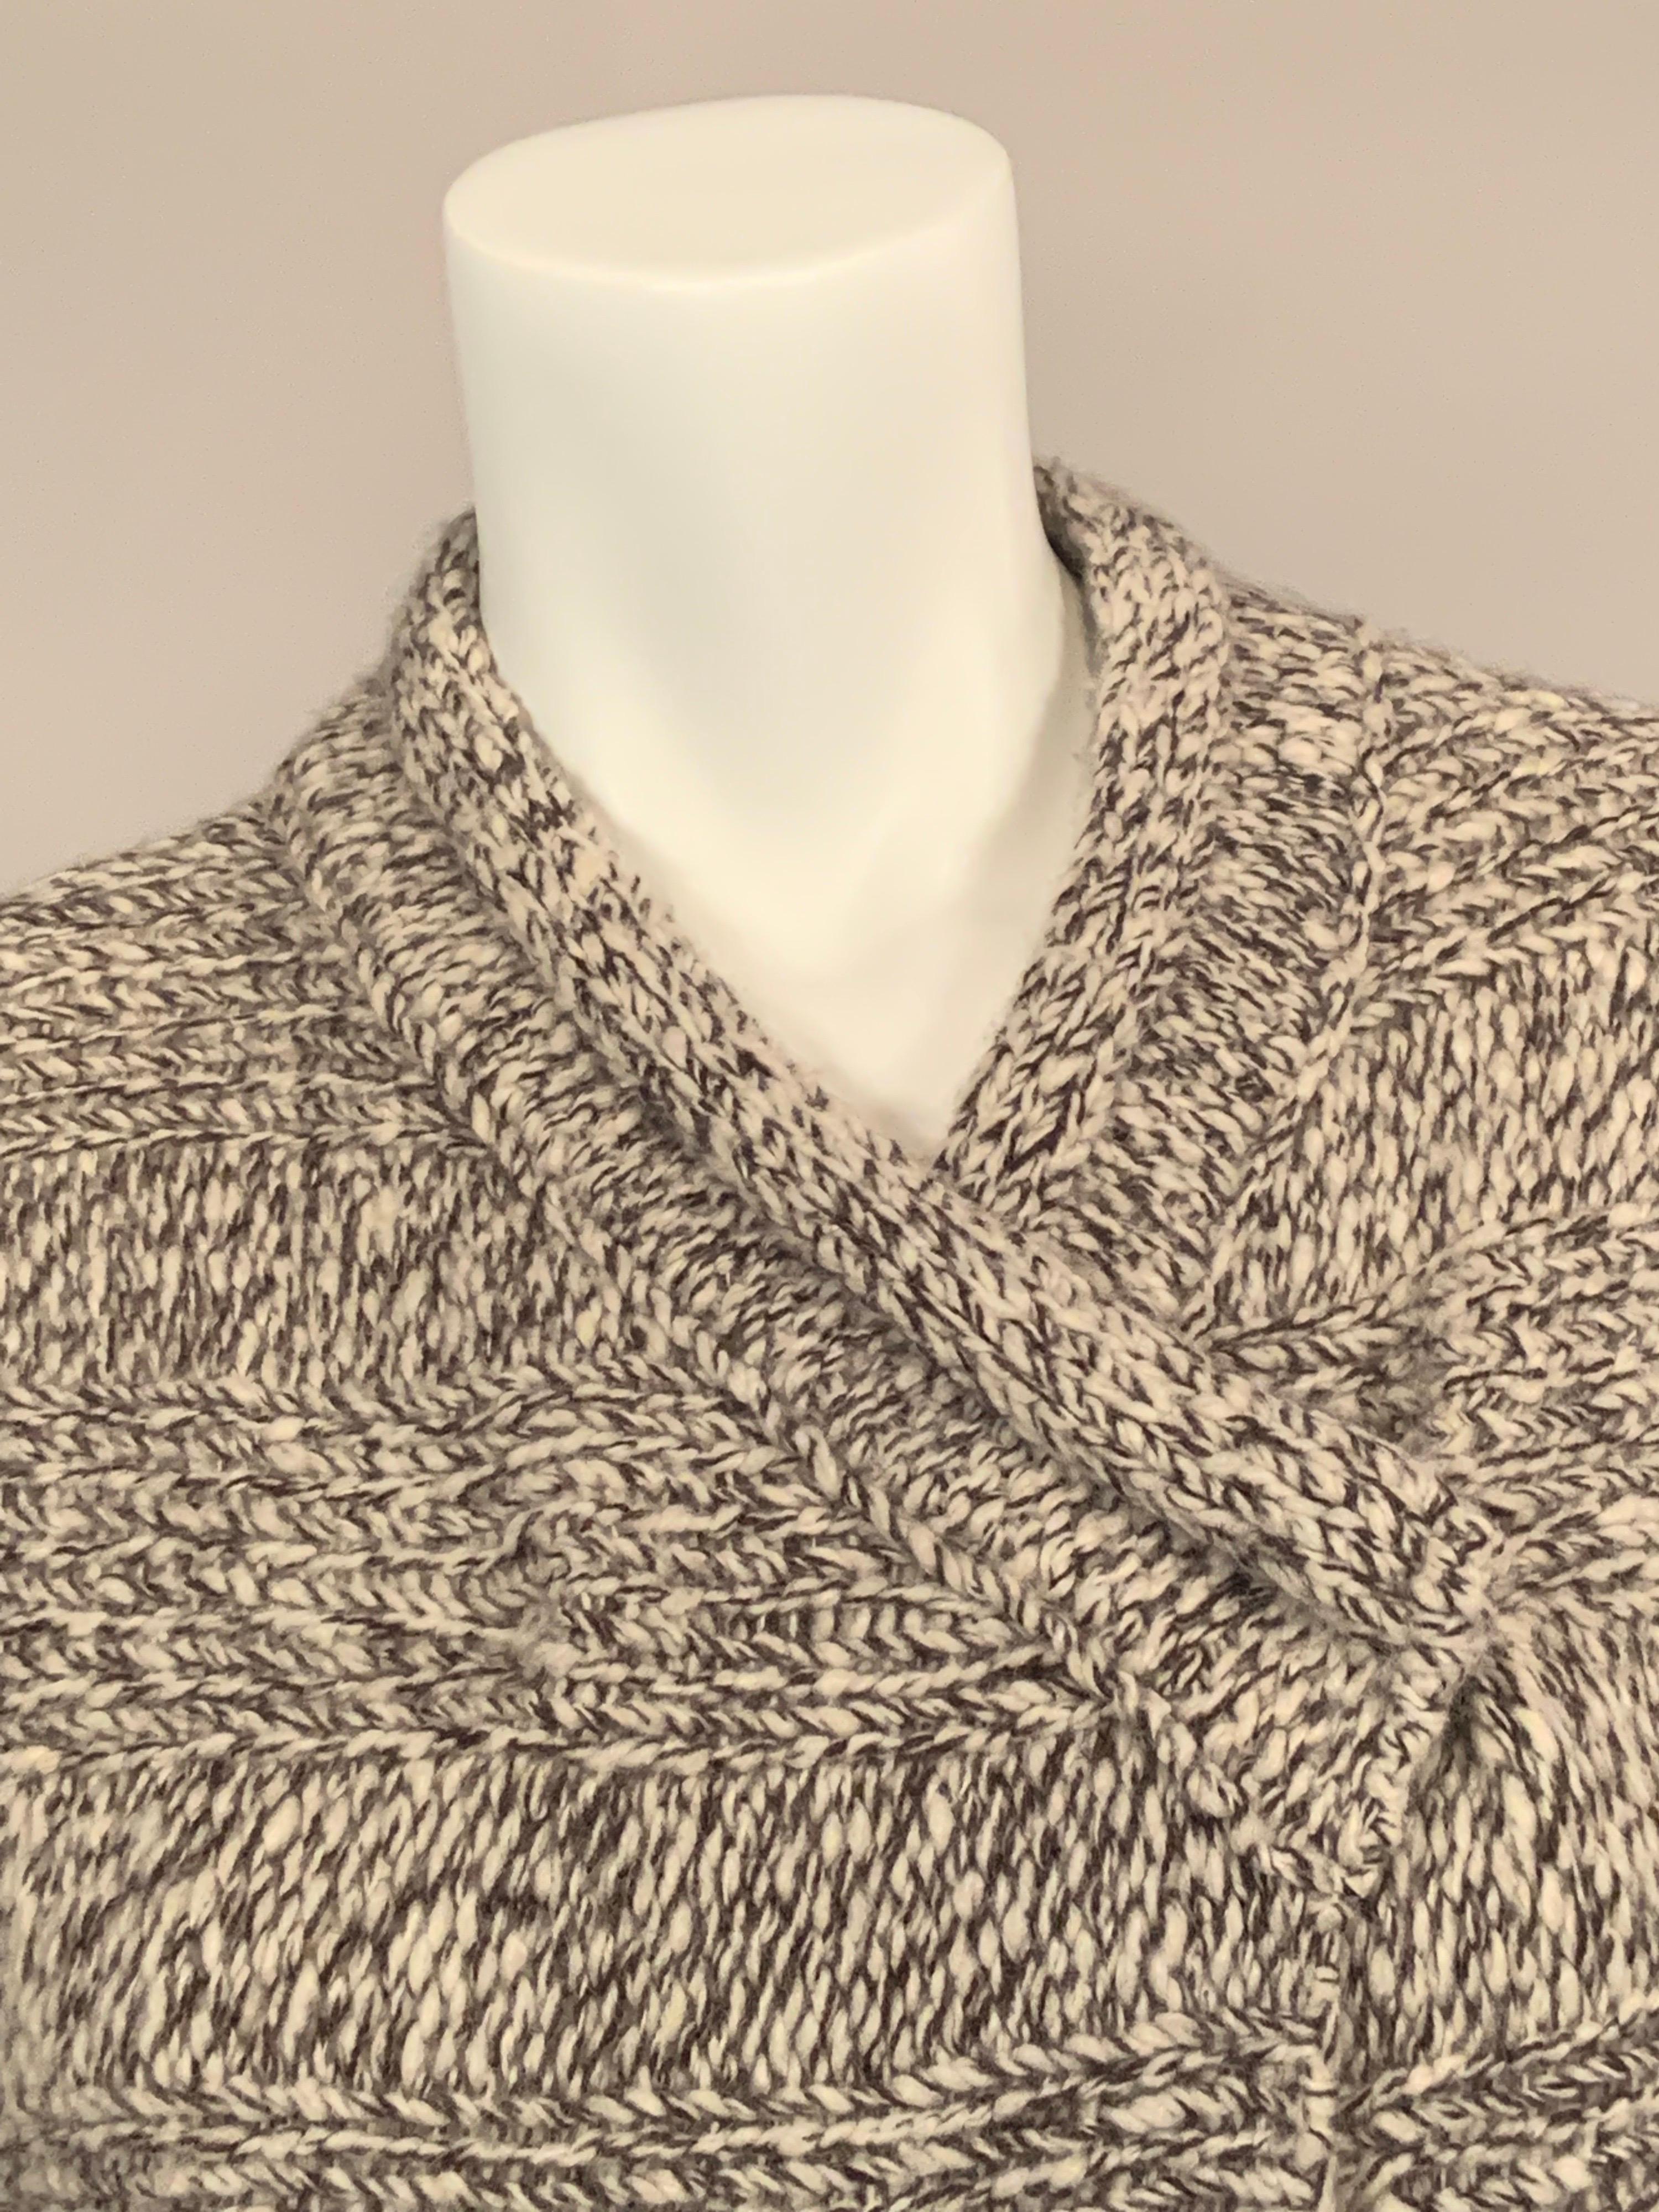 This super soft, light weight cashmere sweater or jacket from Malo, Italy is knit with a heavy gauge, two tone cashmere yarn for extra coziness and warmth, not to mention extra style.  The piece has a roll collar above a three snap closure. 
There